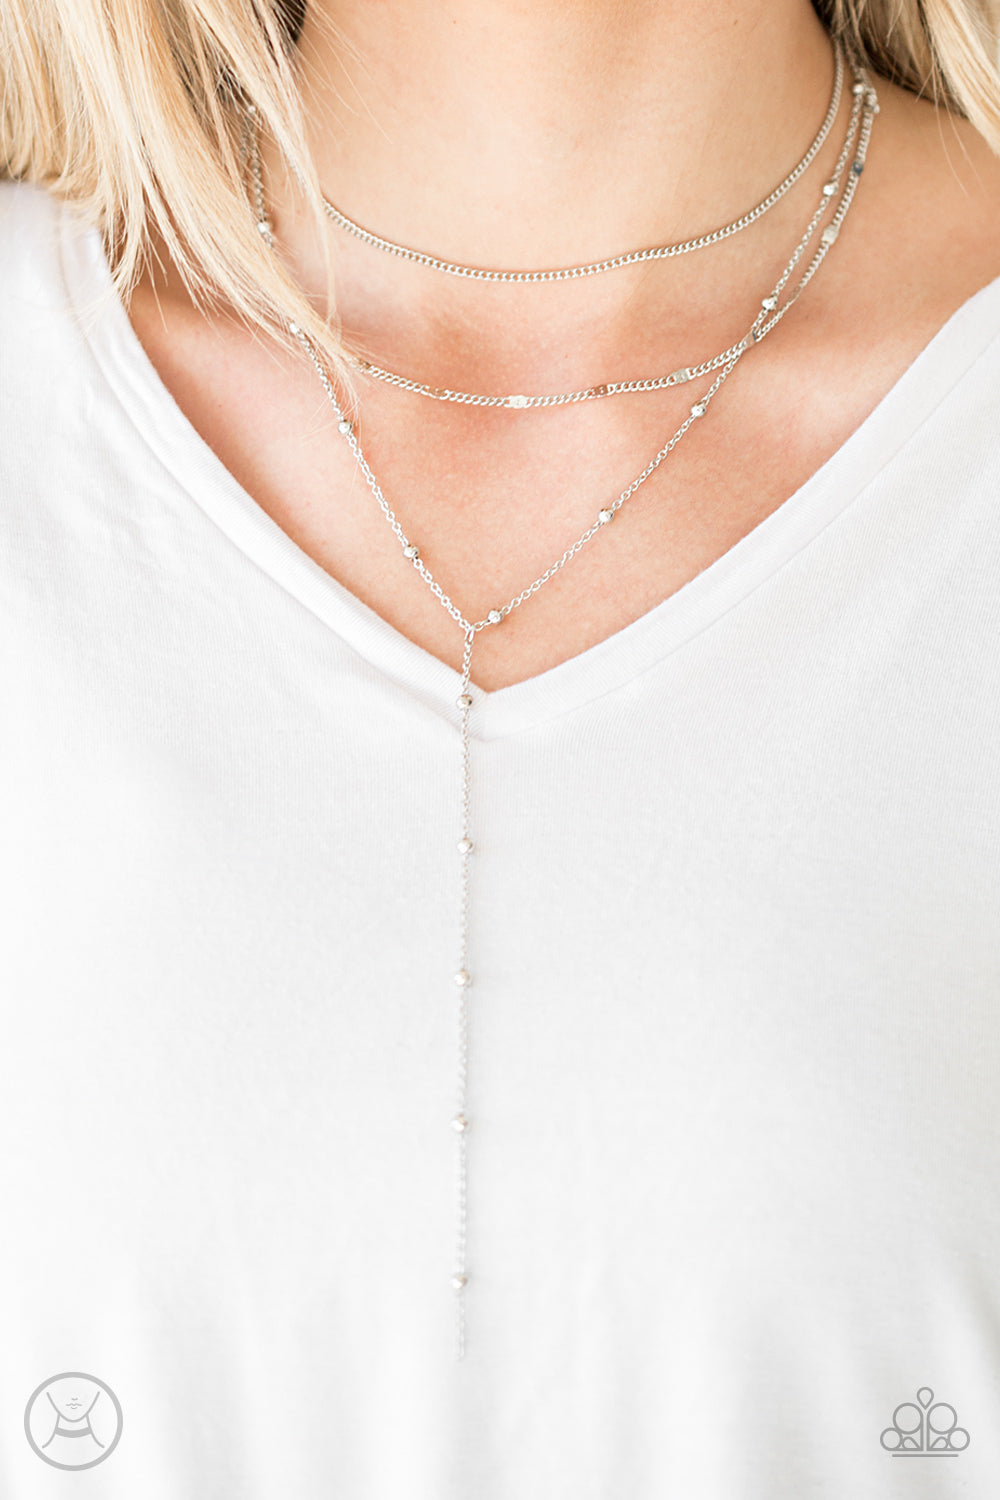 Paparazzi Accessories Think Like a Minimalist - Silver Necklaces - Lady T Accessories